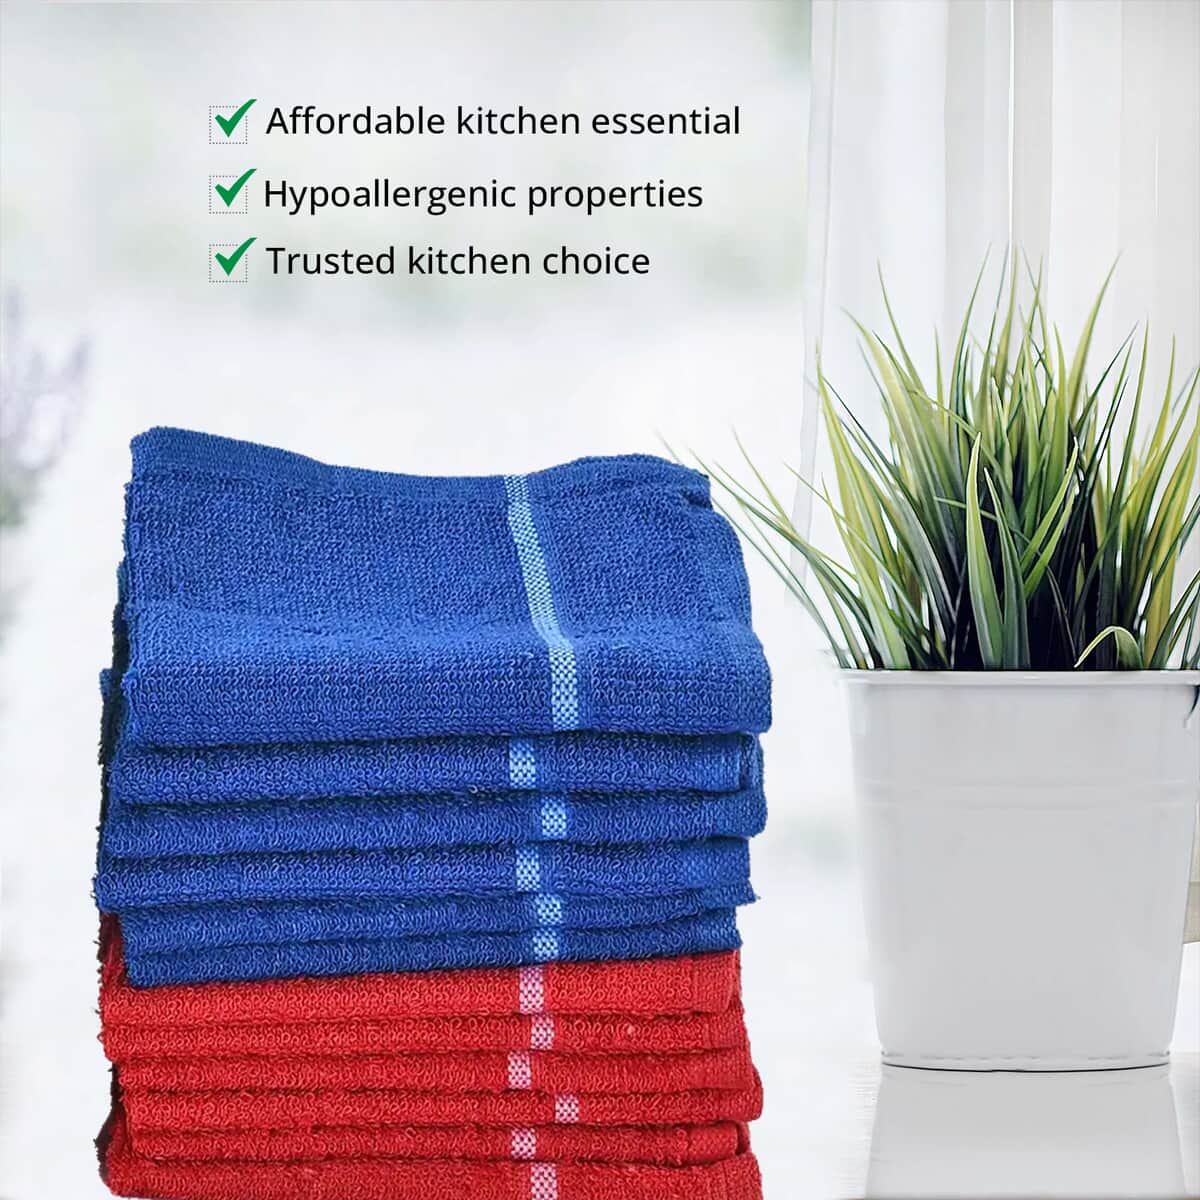 Set of 24pcs Cotton Dish Scrubbing Cleaning Cloth - Multi Color image number 4